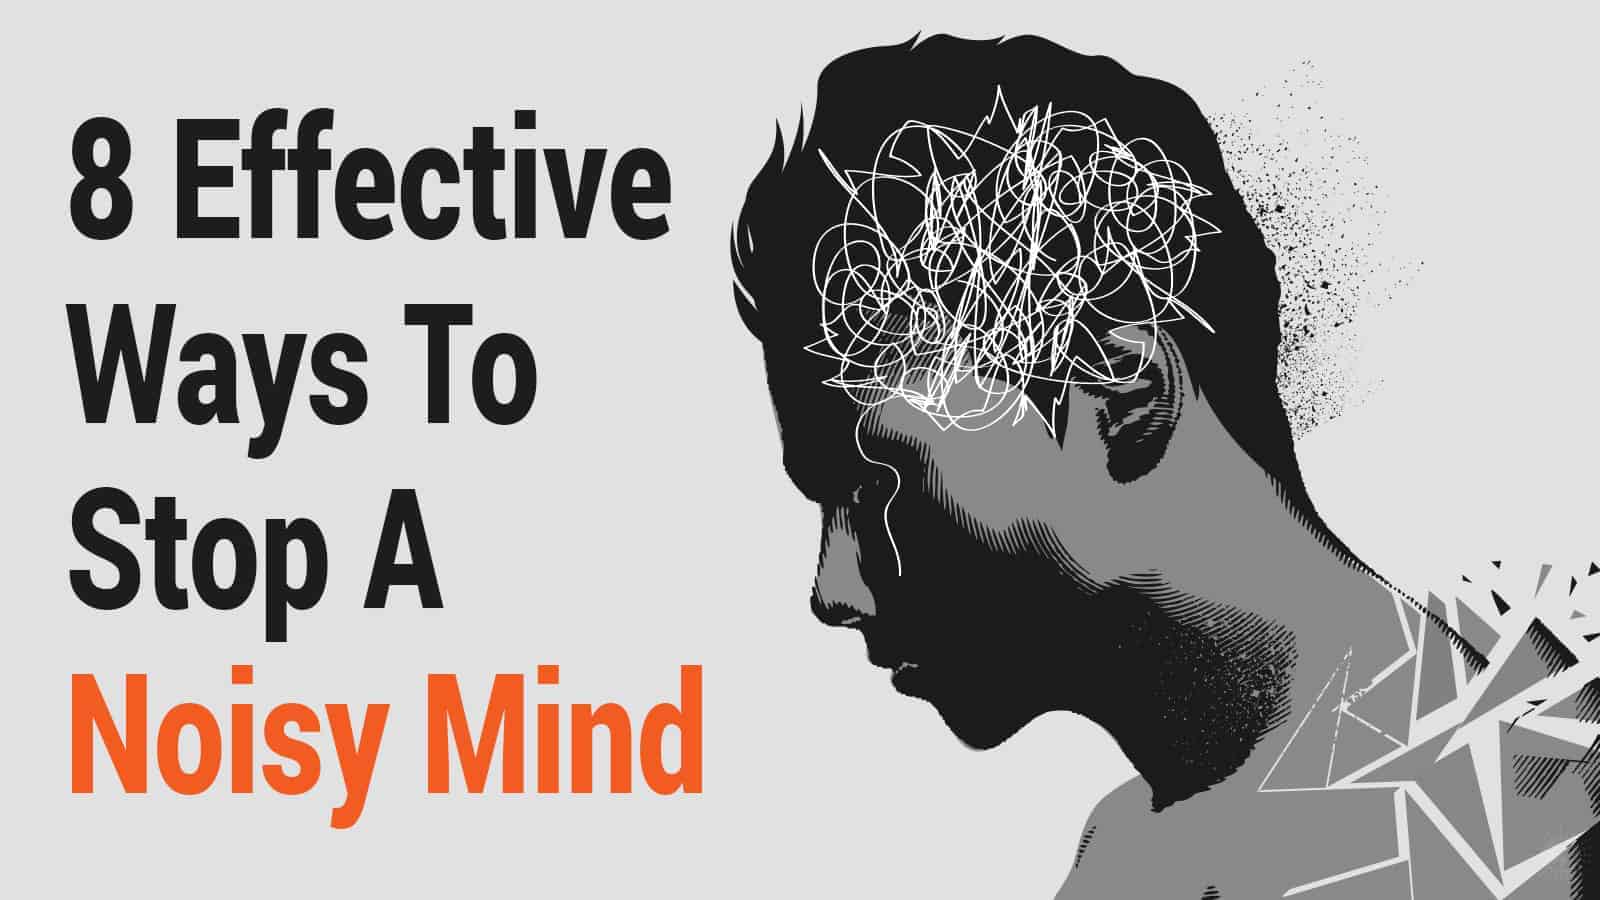 8 Effective Ways To Stop A Noisy Mind